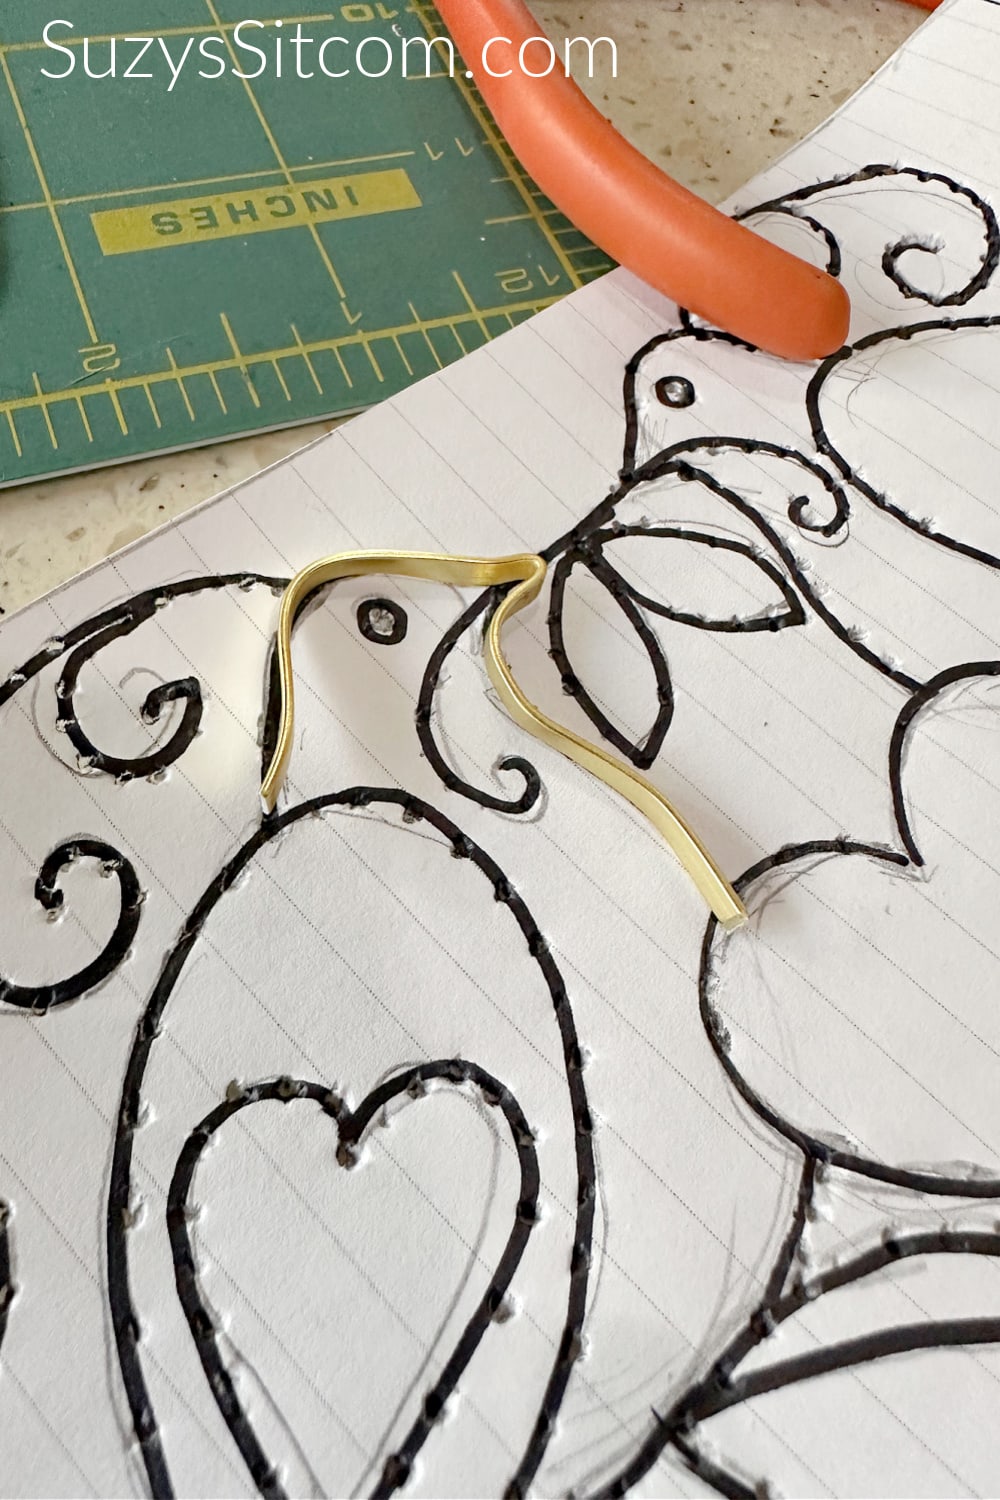 Using pattern to form the wire.